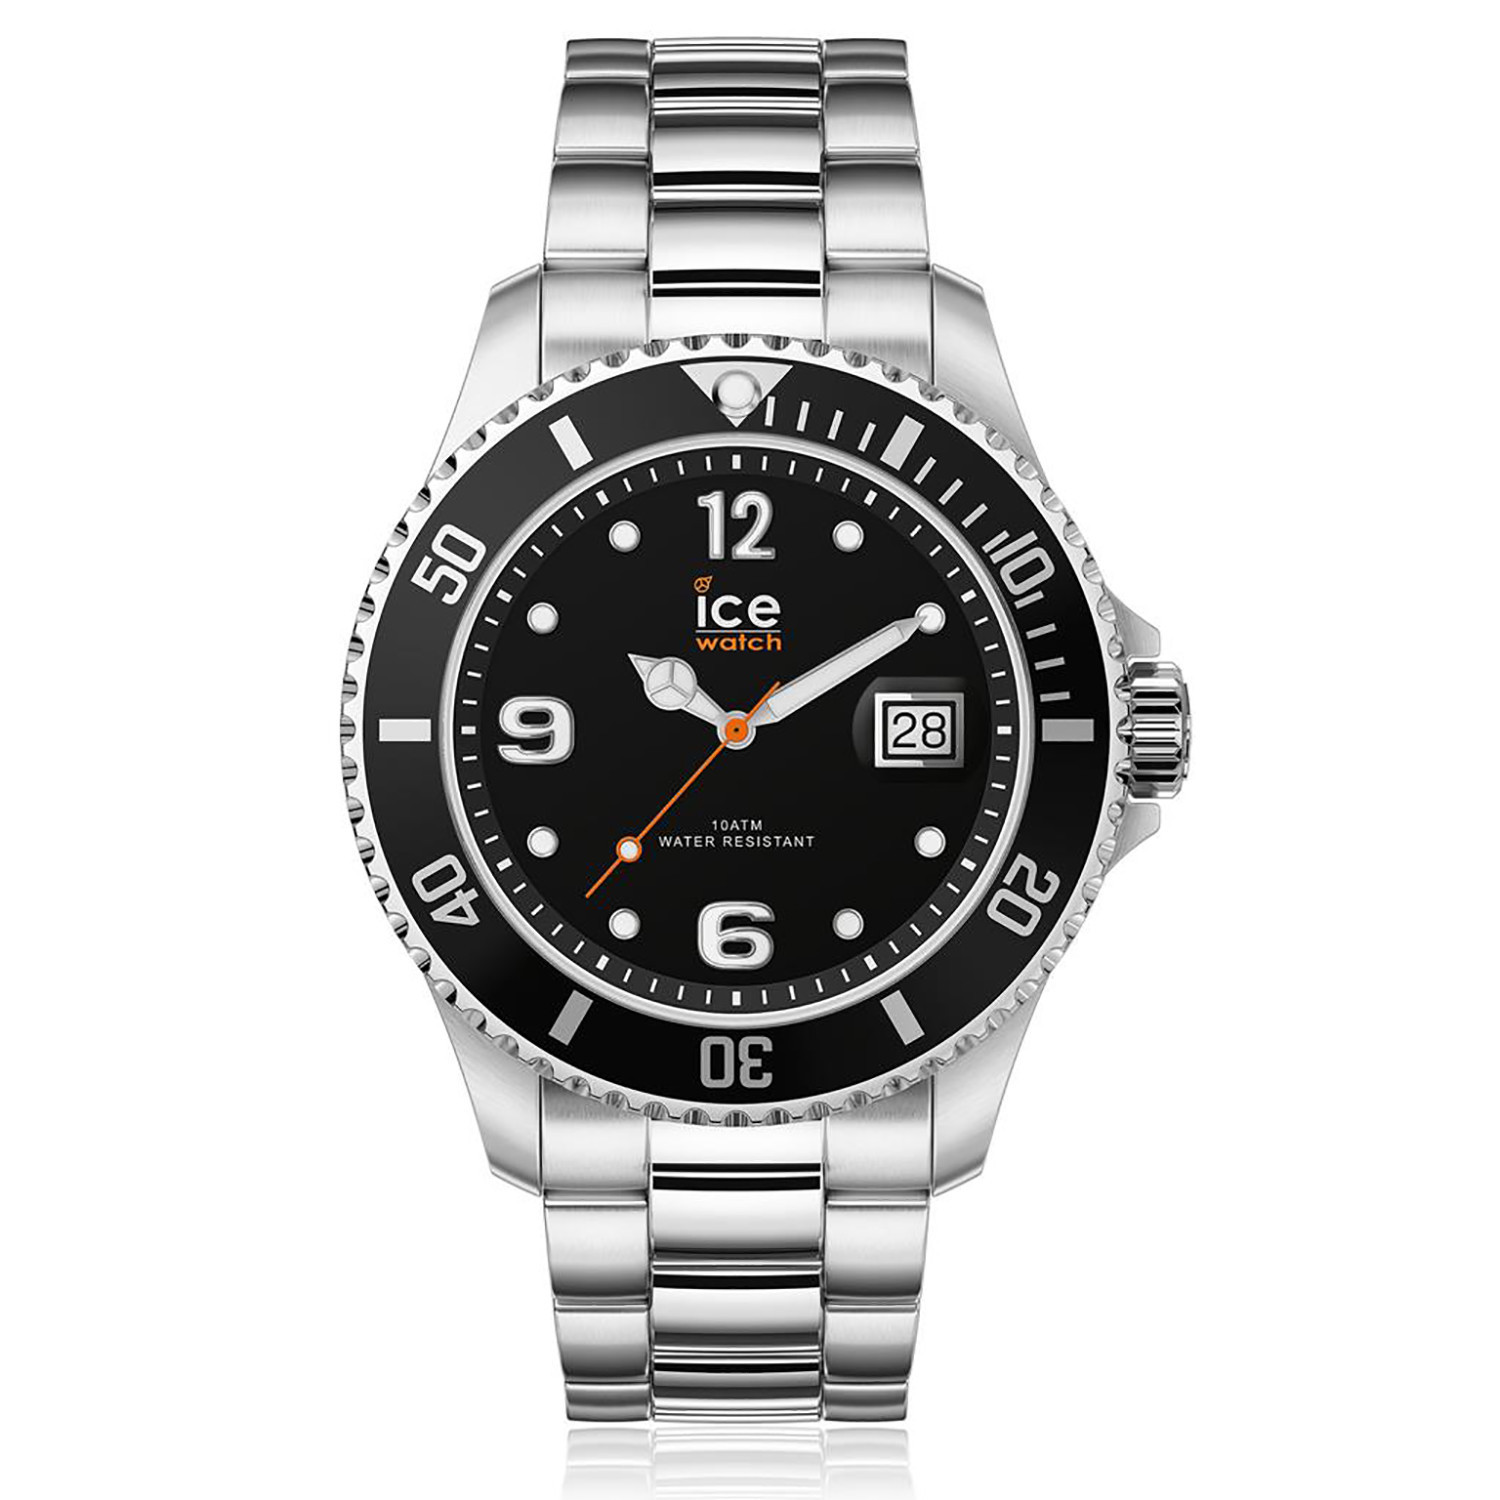 Montre Ice Watch steel black silver small